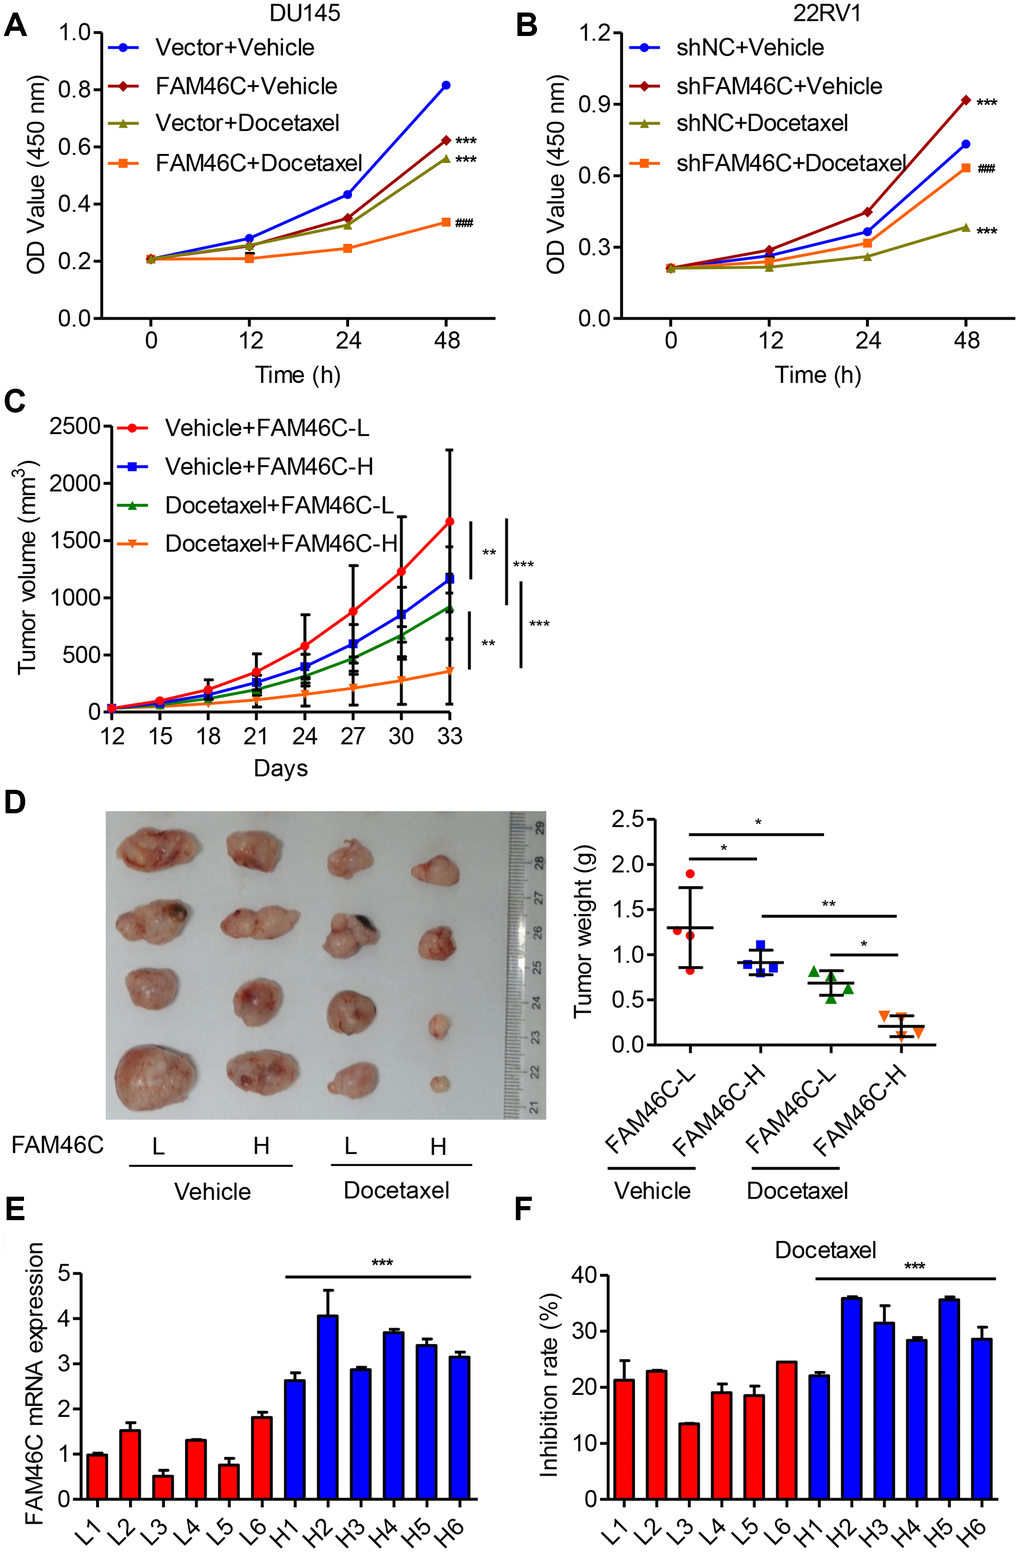 Higher FAM46C expression enhanced the chemosensitivity of prostate cancer cells. (A) CCK-8 showing the effect of pLVX-Puro-FAM46C lentivirus transduction on the proliferation of DU145cells treated with 10 nM docetaxel. (B) CCK-8 showing the effect of pLKO.1-shFAM46C transduction on the proliferation of 22RV1 cells treated with 10 nM docetaxel. ***P###PC, D) Tumor weight and volume were measured in mice with PDX model following 10 mg/kg docetaxel chemotherapy (n=4). (E) FAM46C mRNA expression levels were measured by qPCR in the tumor cells isolated from primary prostate cancer patients from hospital cohort (n=12). (F) After primary isolated prostate cancer cells (n=12) were treated with 10 nM docetaxel, the inhibition rates of cell proliferation was measured (24 h relative to 0 h). *PPP